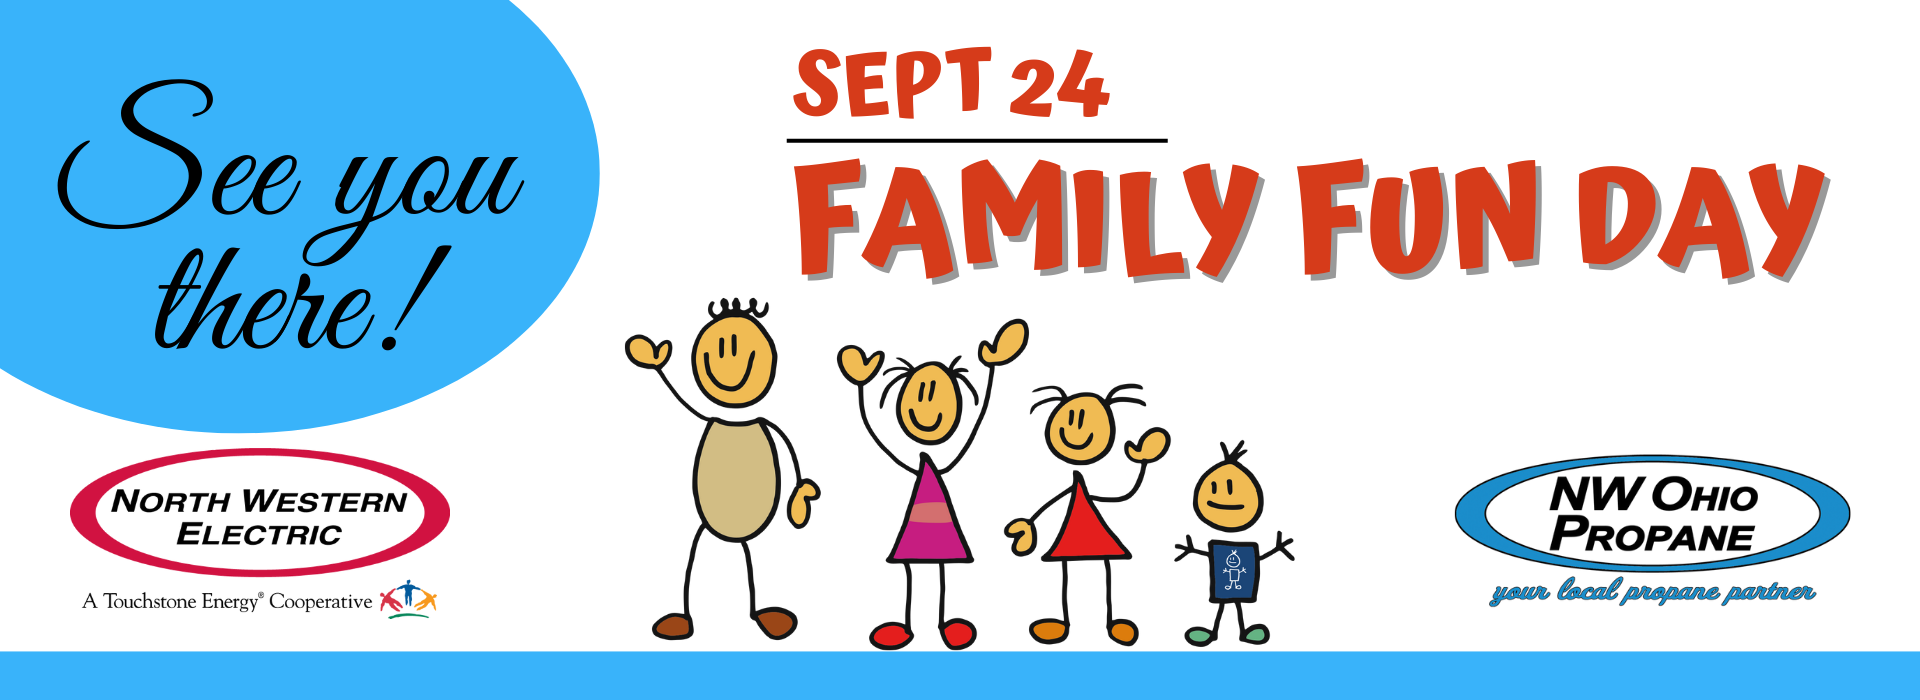 Family fun day promo with two logos and stick family graphic